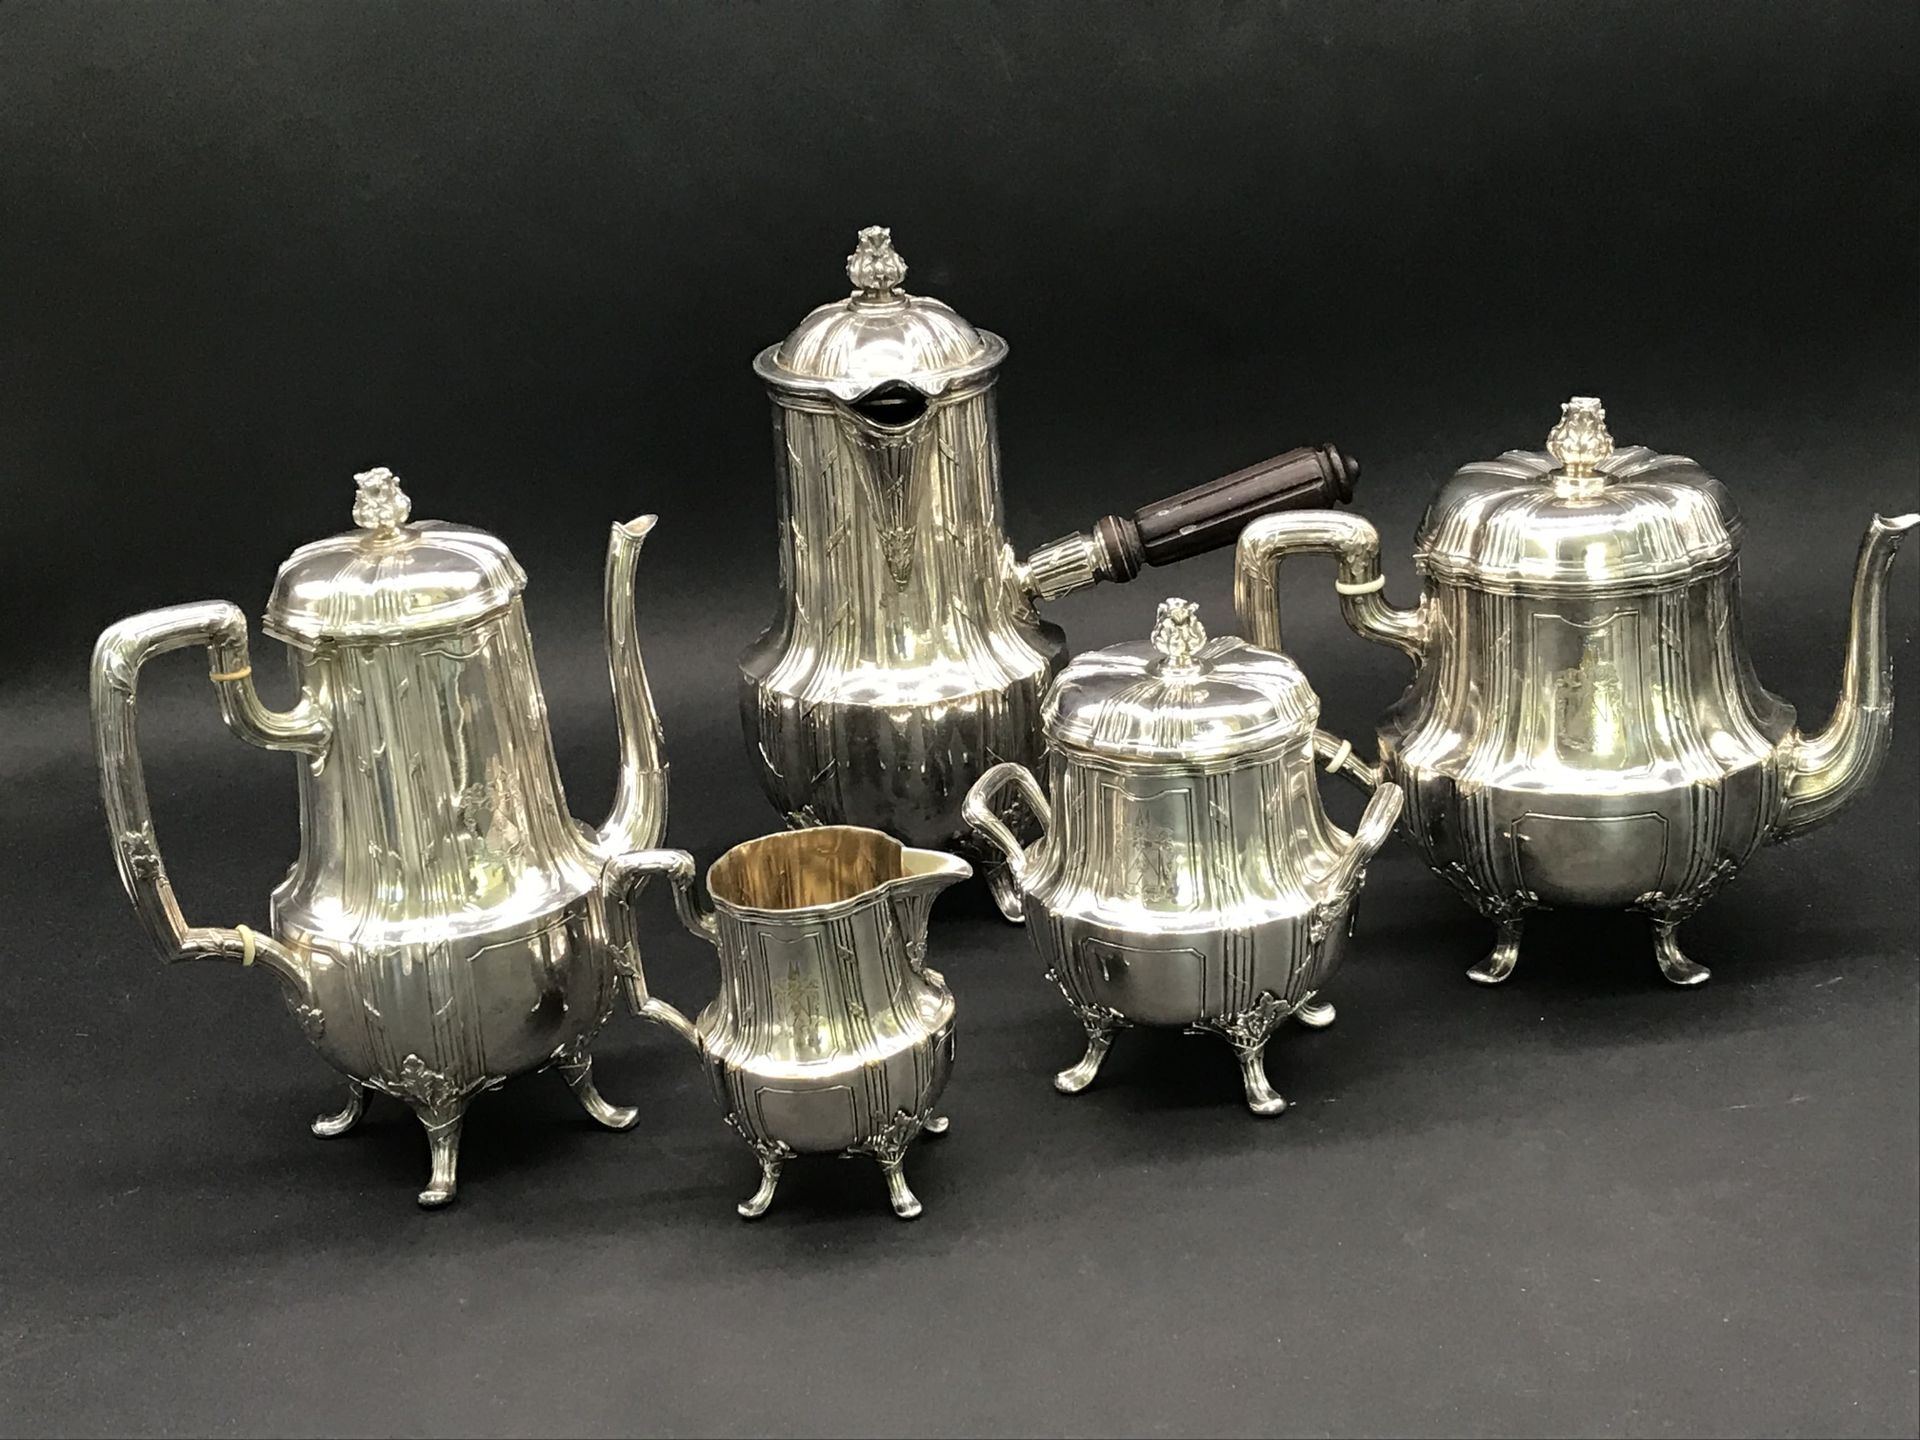 Null CAILAR BAYAR

Louis XV style silver plated chocolate, tea and coffee set 

&hellip;